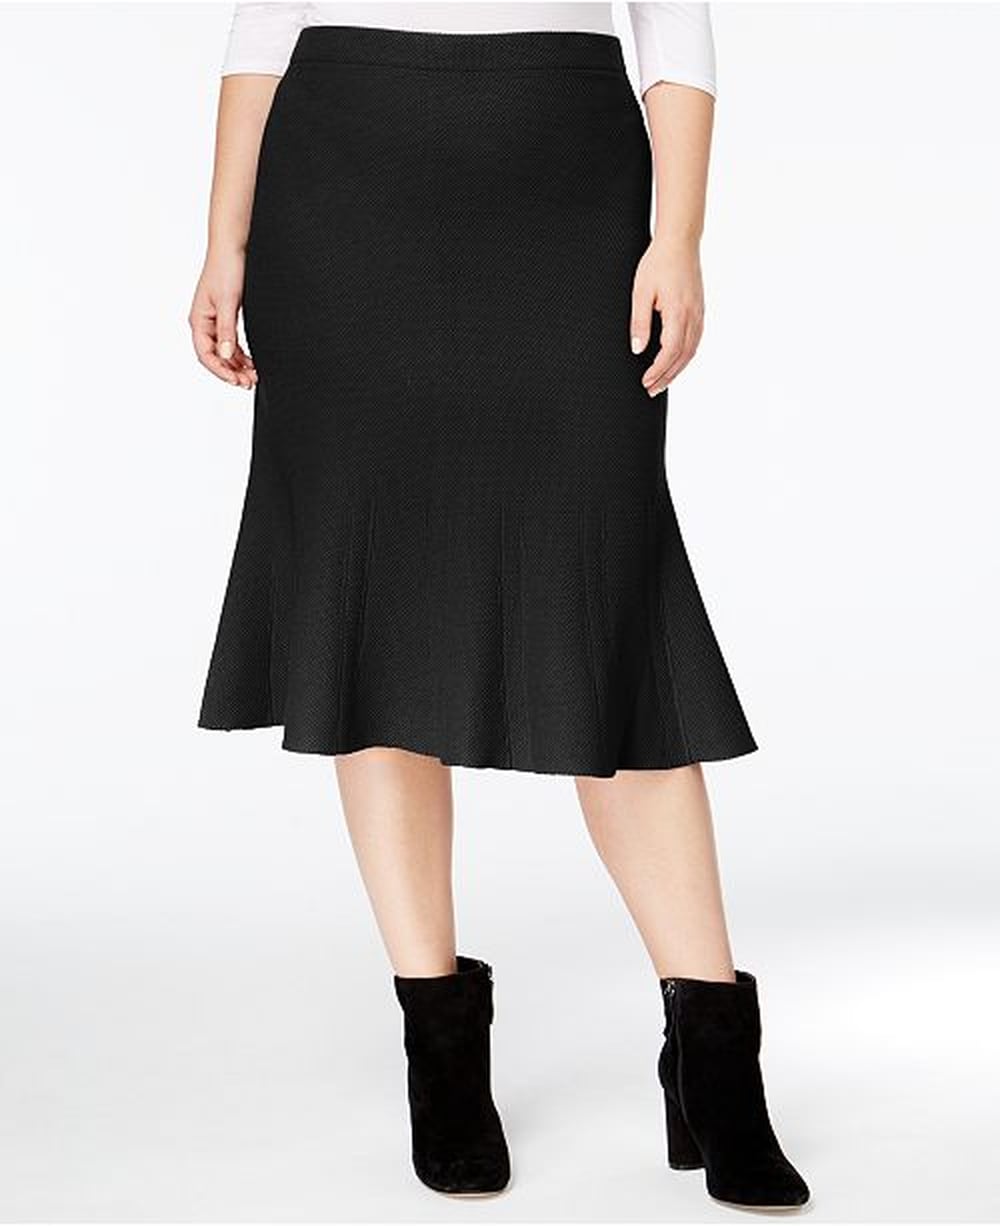 The Best Skirts For Plus-Size Women at Macy's | POPSUGAR Fashion